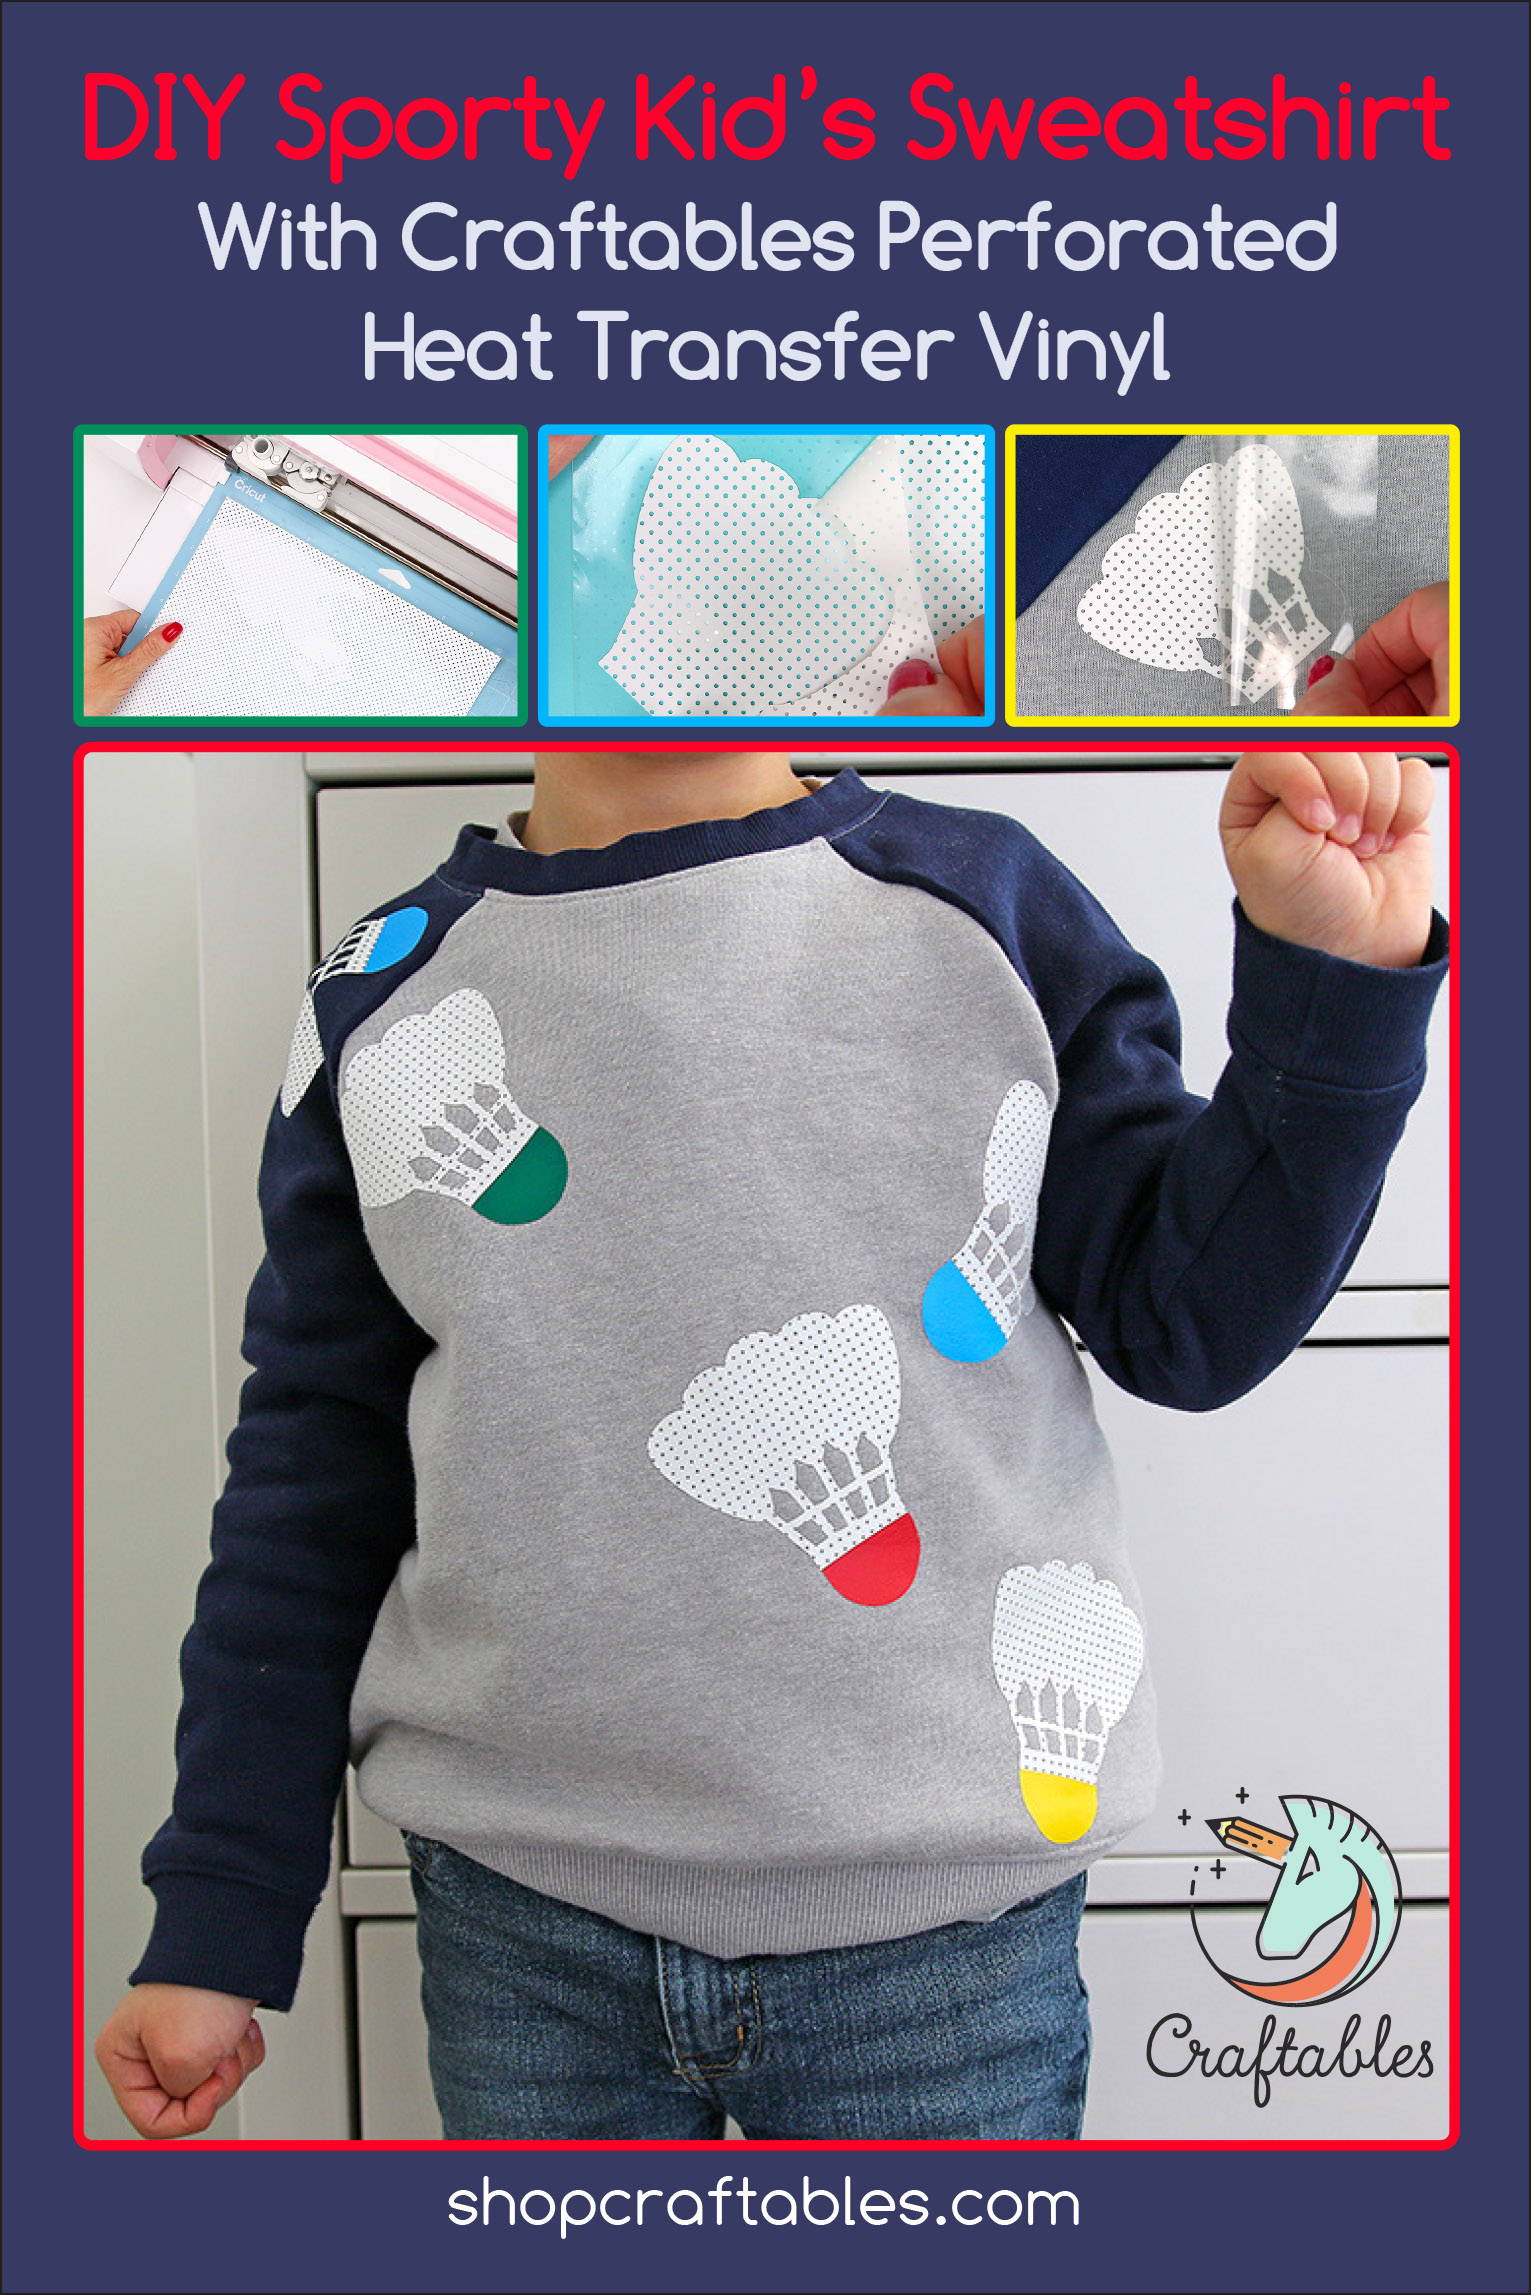 Problems Getting Heat Transfer Vinyl To Stick? Try These Tricks! –  shopcraftables